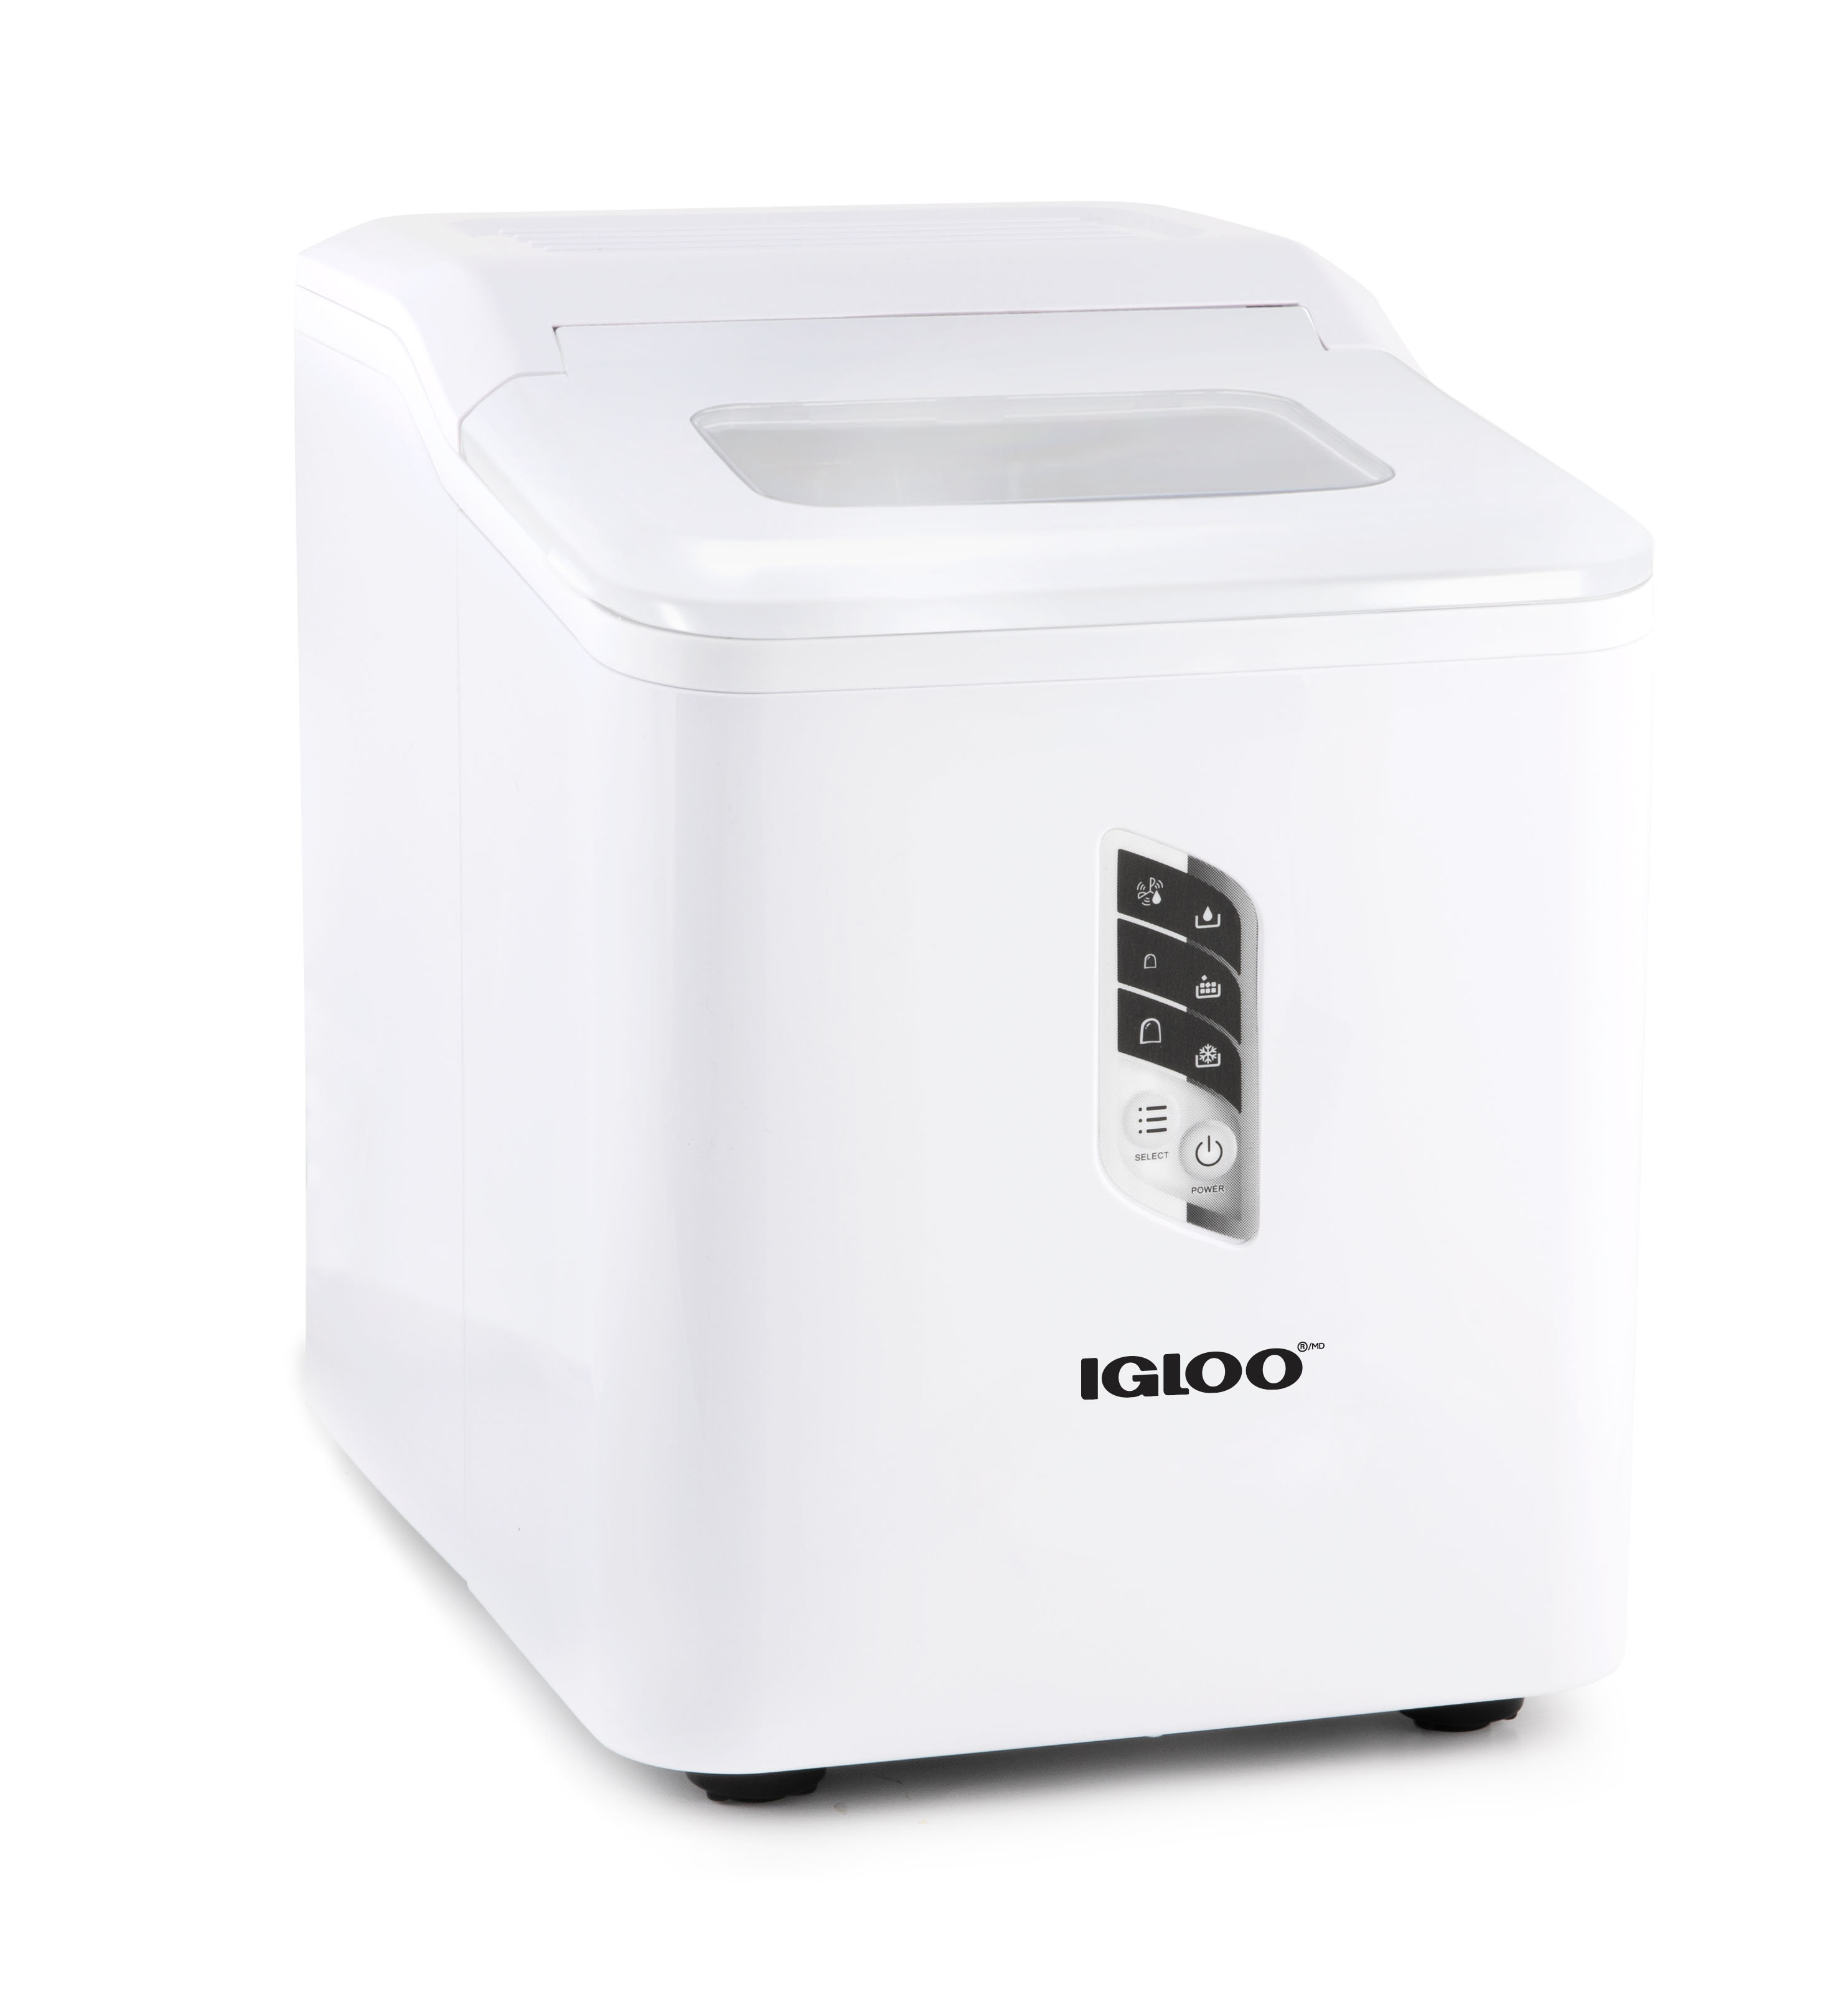 Igloo IGLICEBSC26RD Automatic Self-Cleaning 26-Pound Ice Maker